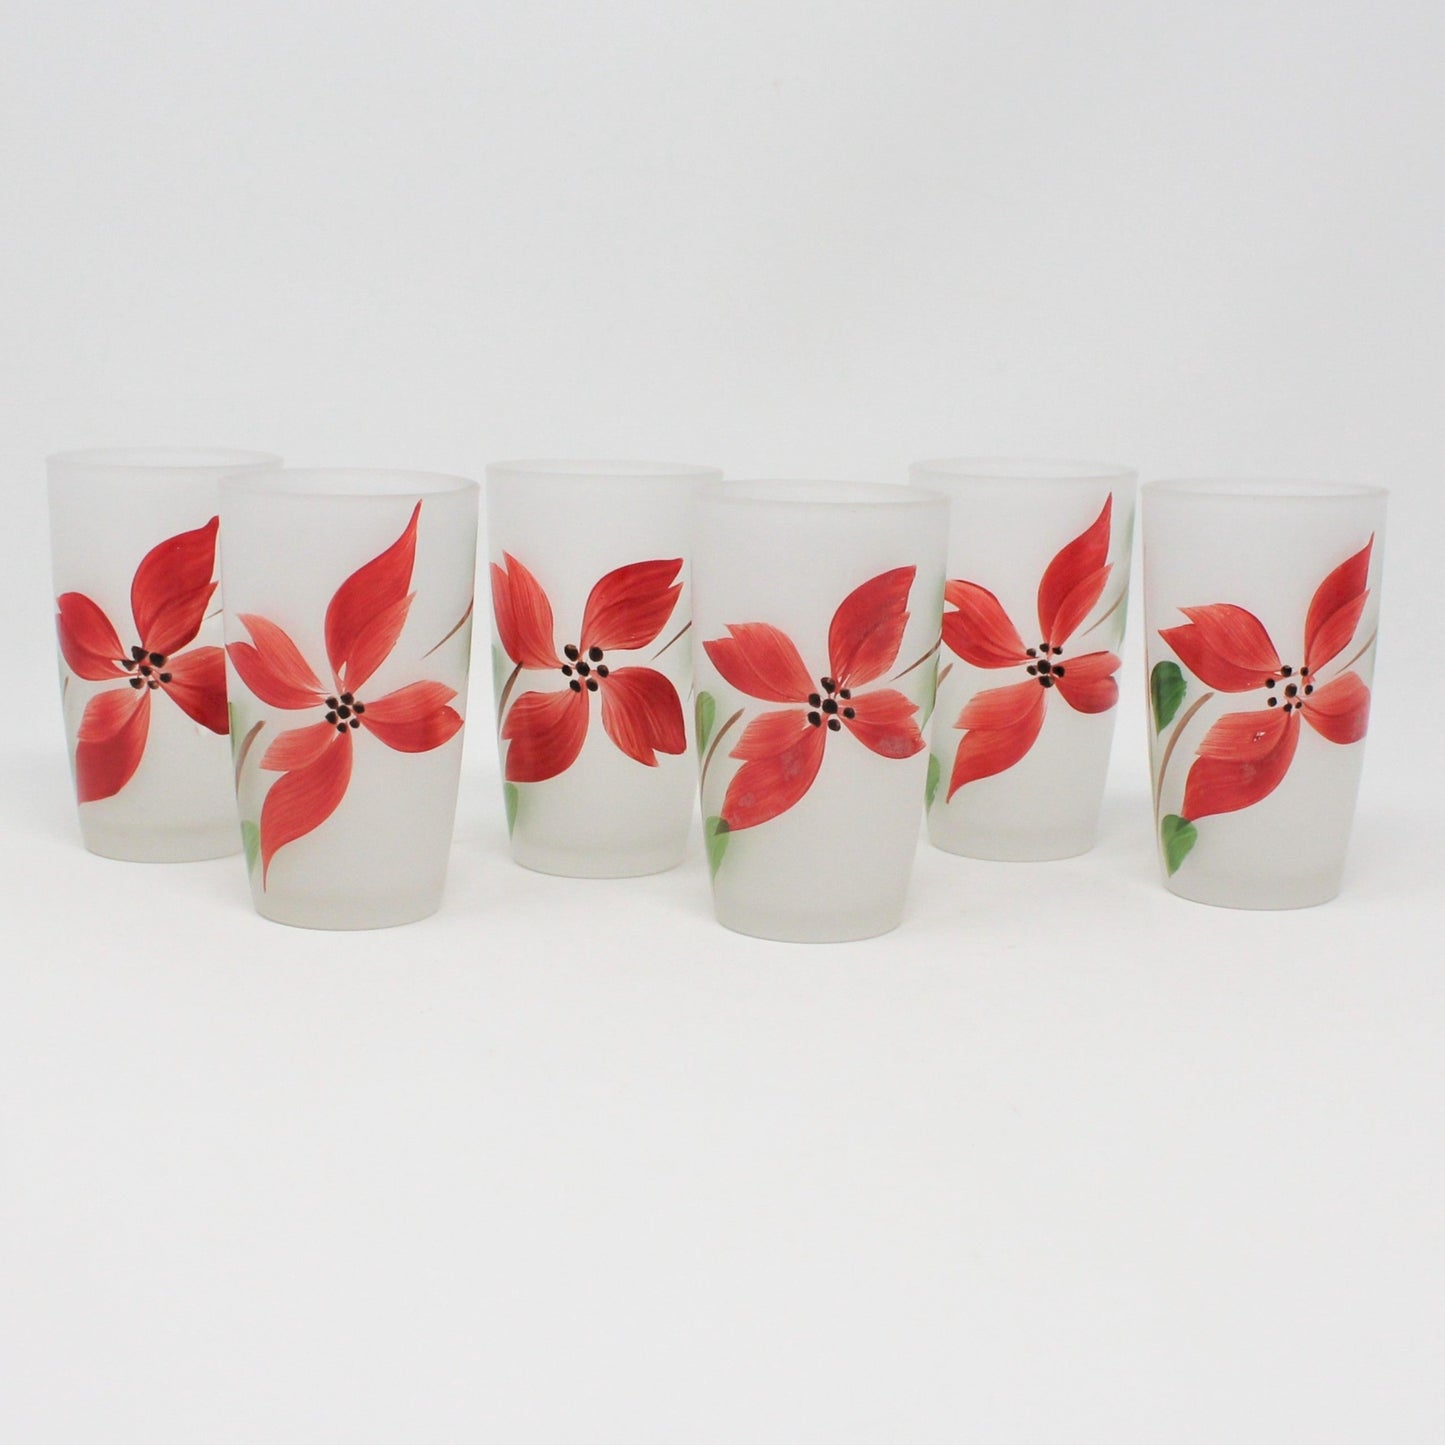 Pitcher & Glasses, Gay Fad, Hand Painted Red Flowers, Set of 7, Vintage